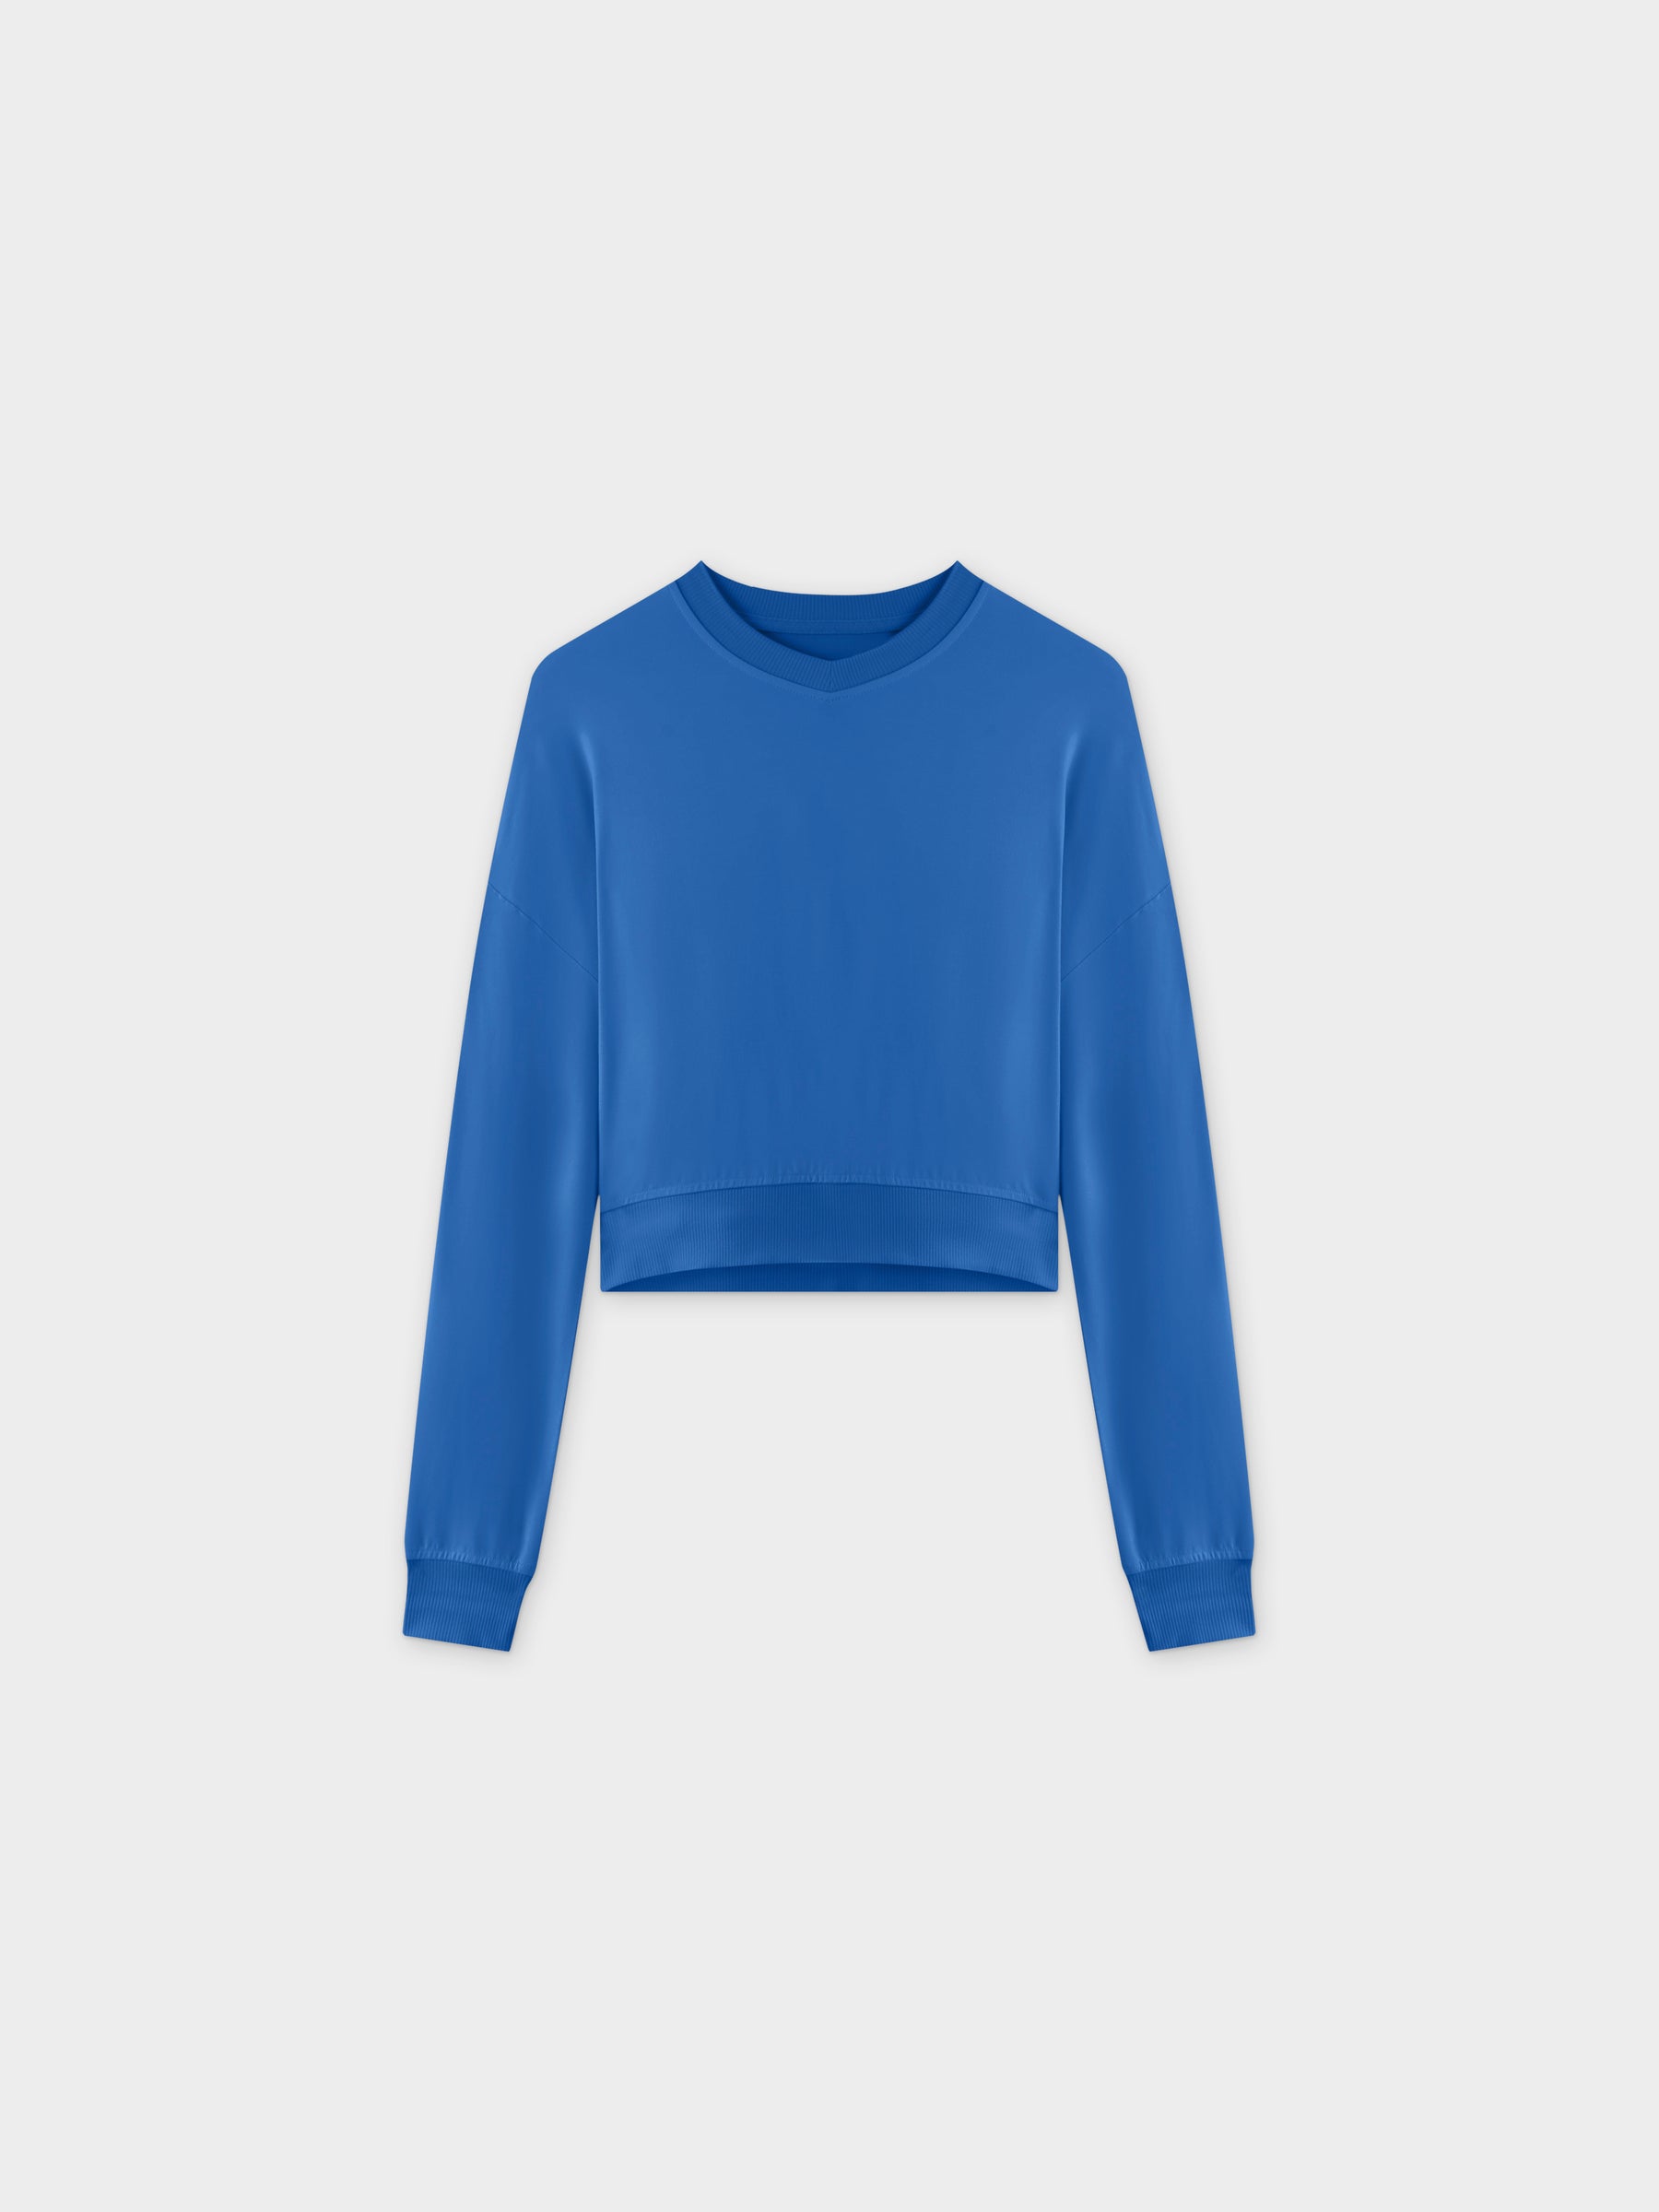 Cropped Tee-Royal Blue